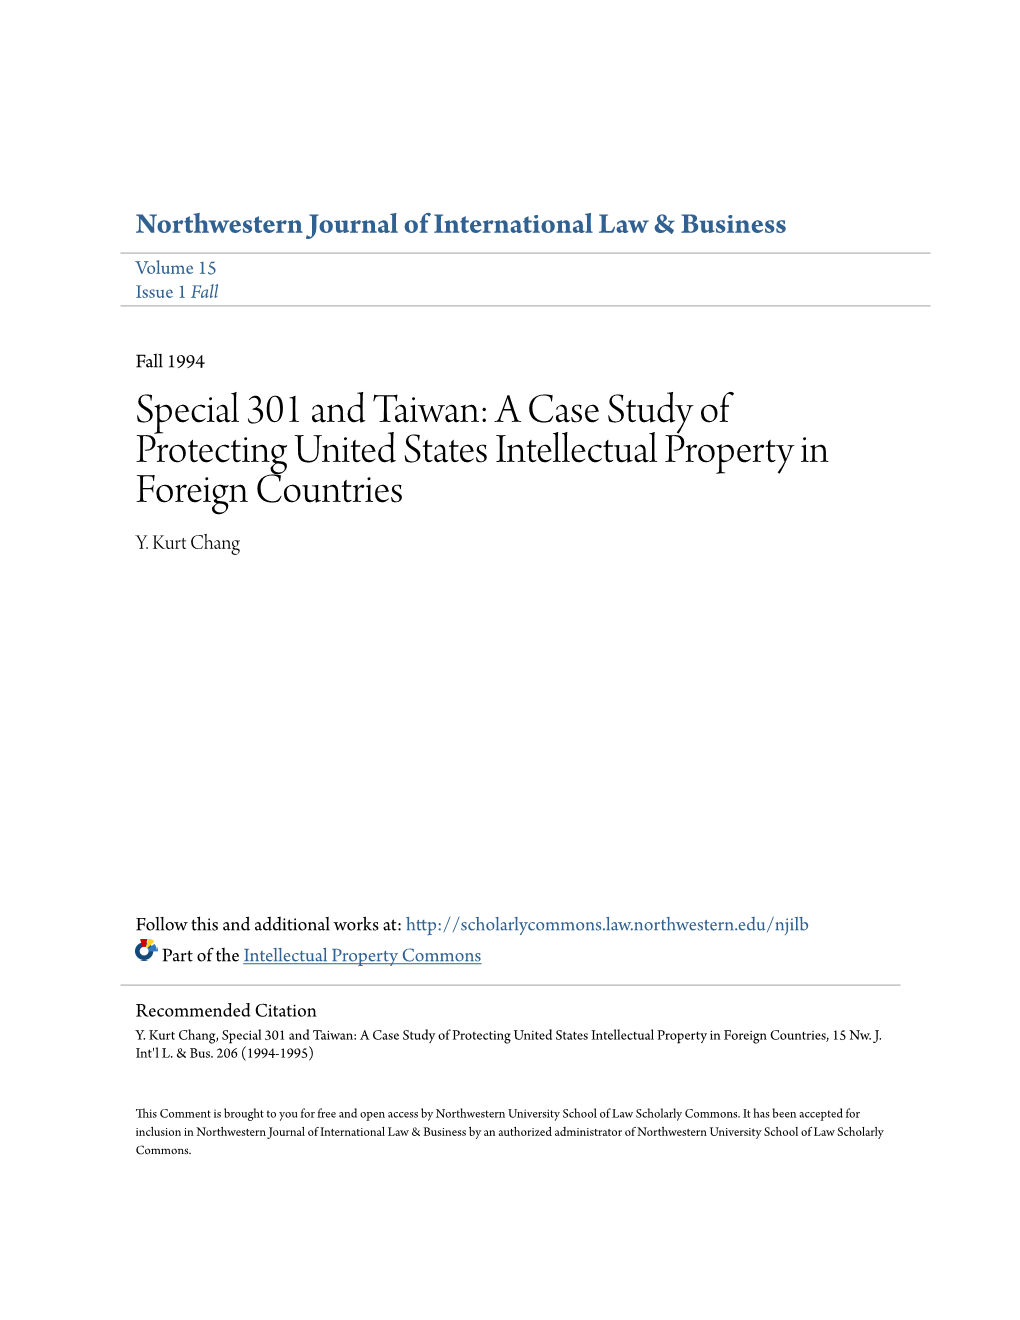 Special 301 and Taiwan: a Case Study of Protecting United States Intellectual Property in Foreign Countries Y